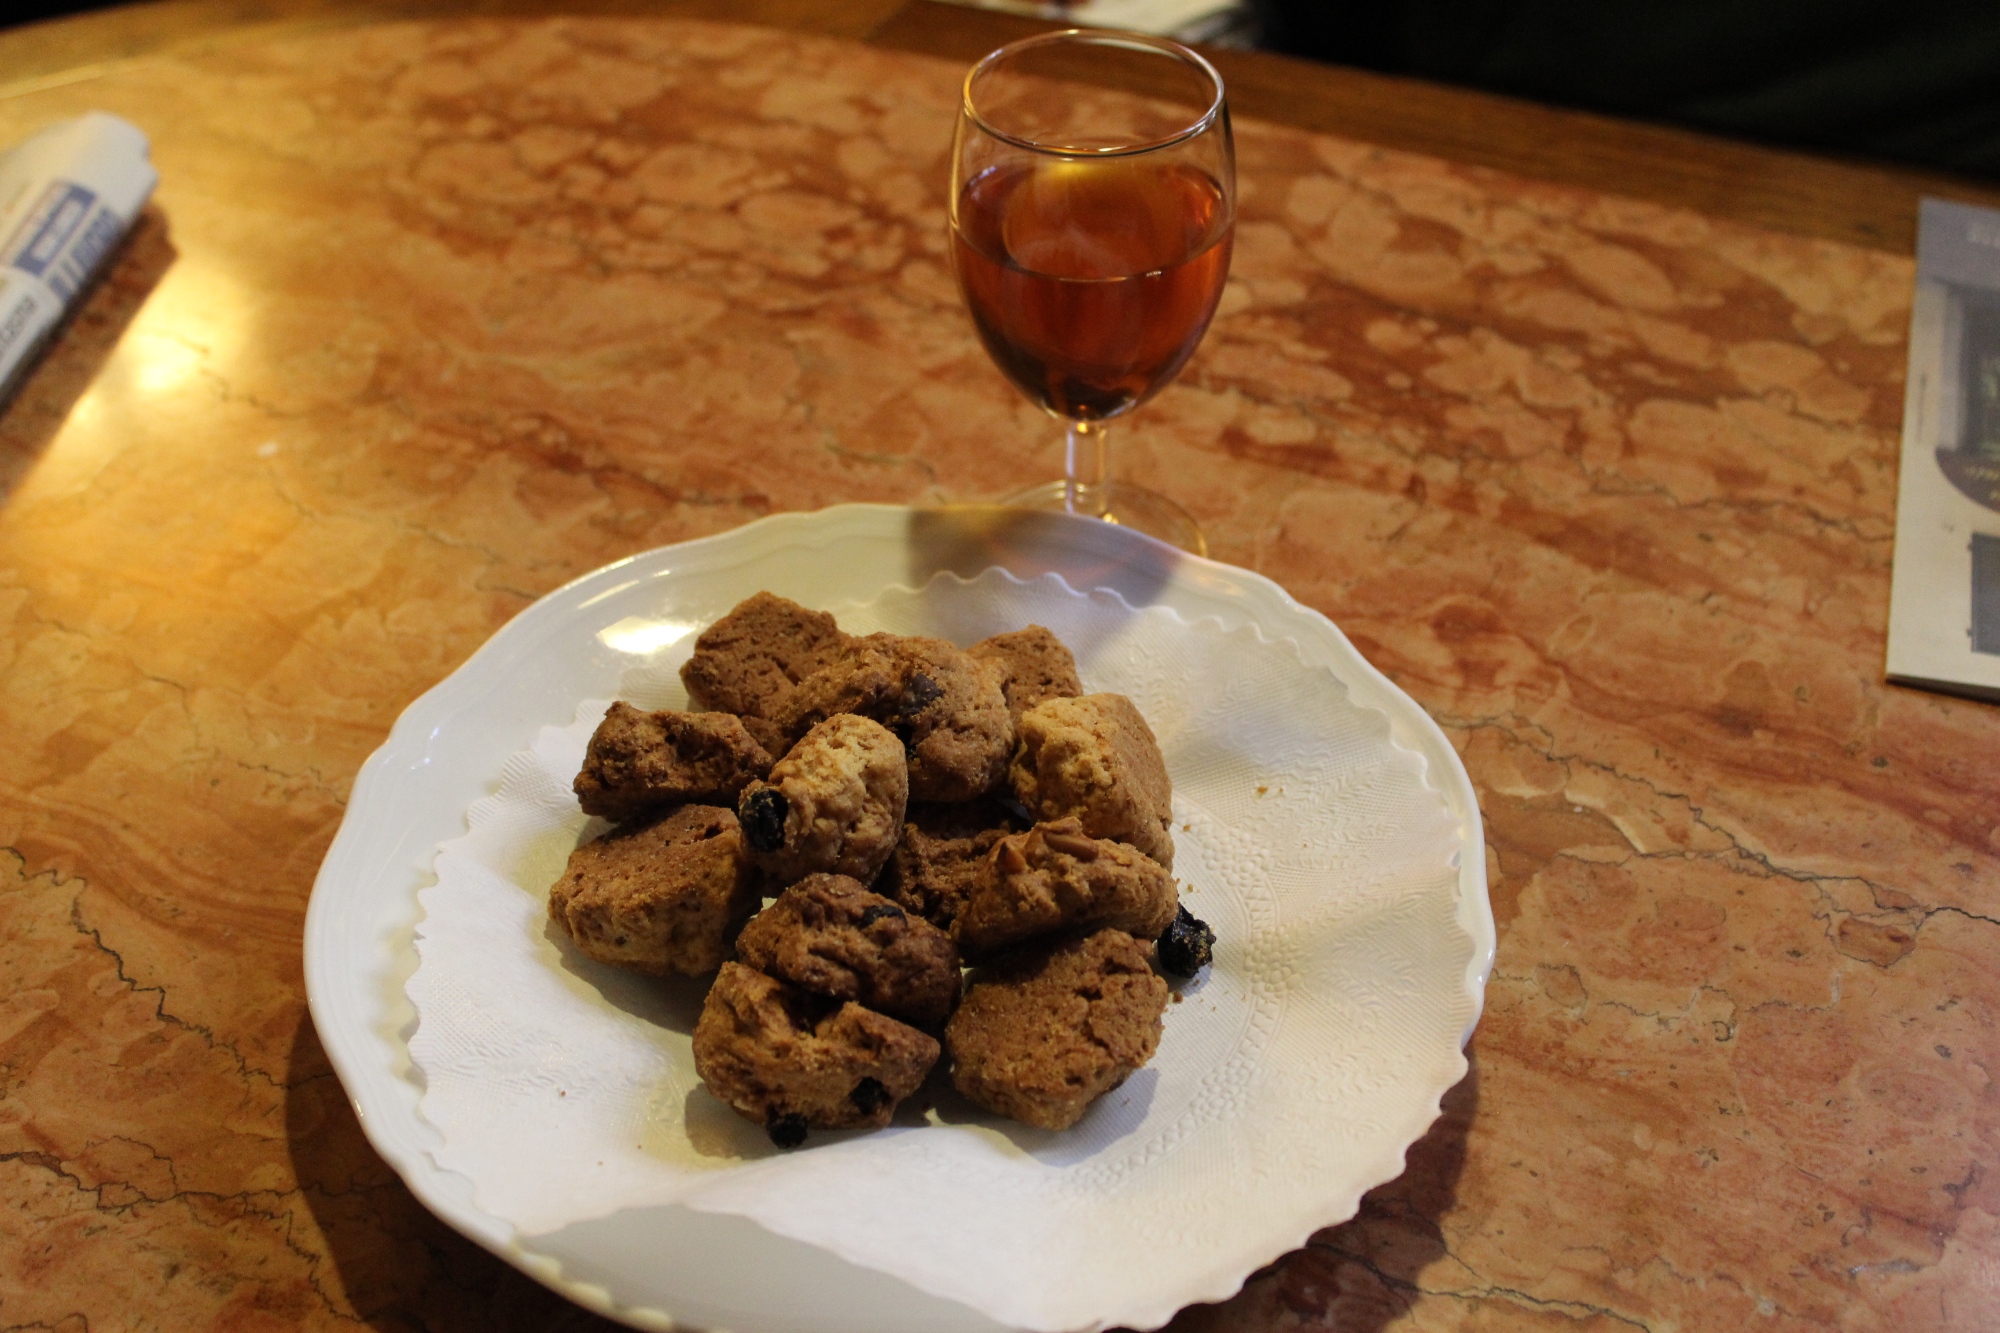 Tasting Vin Santo and Cantuccini biscuits in Lucca